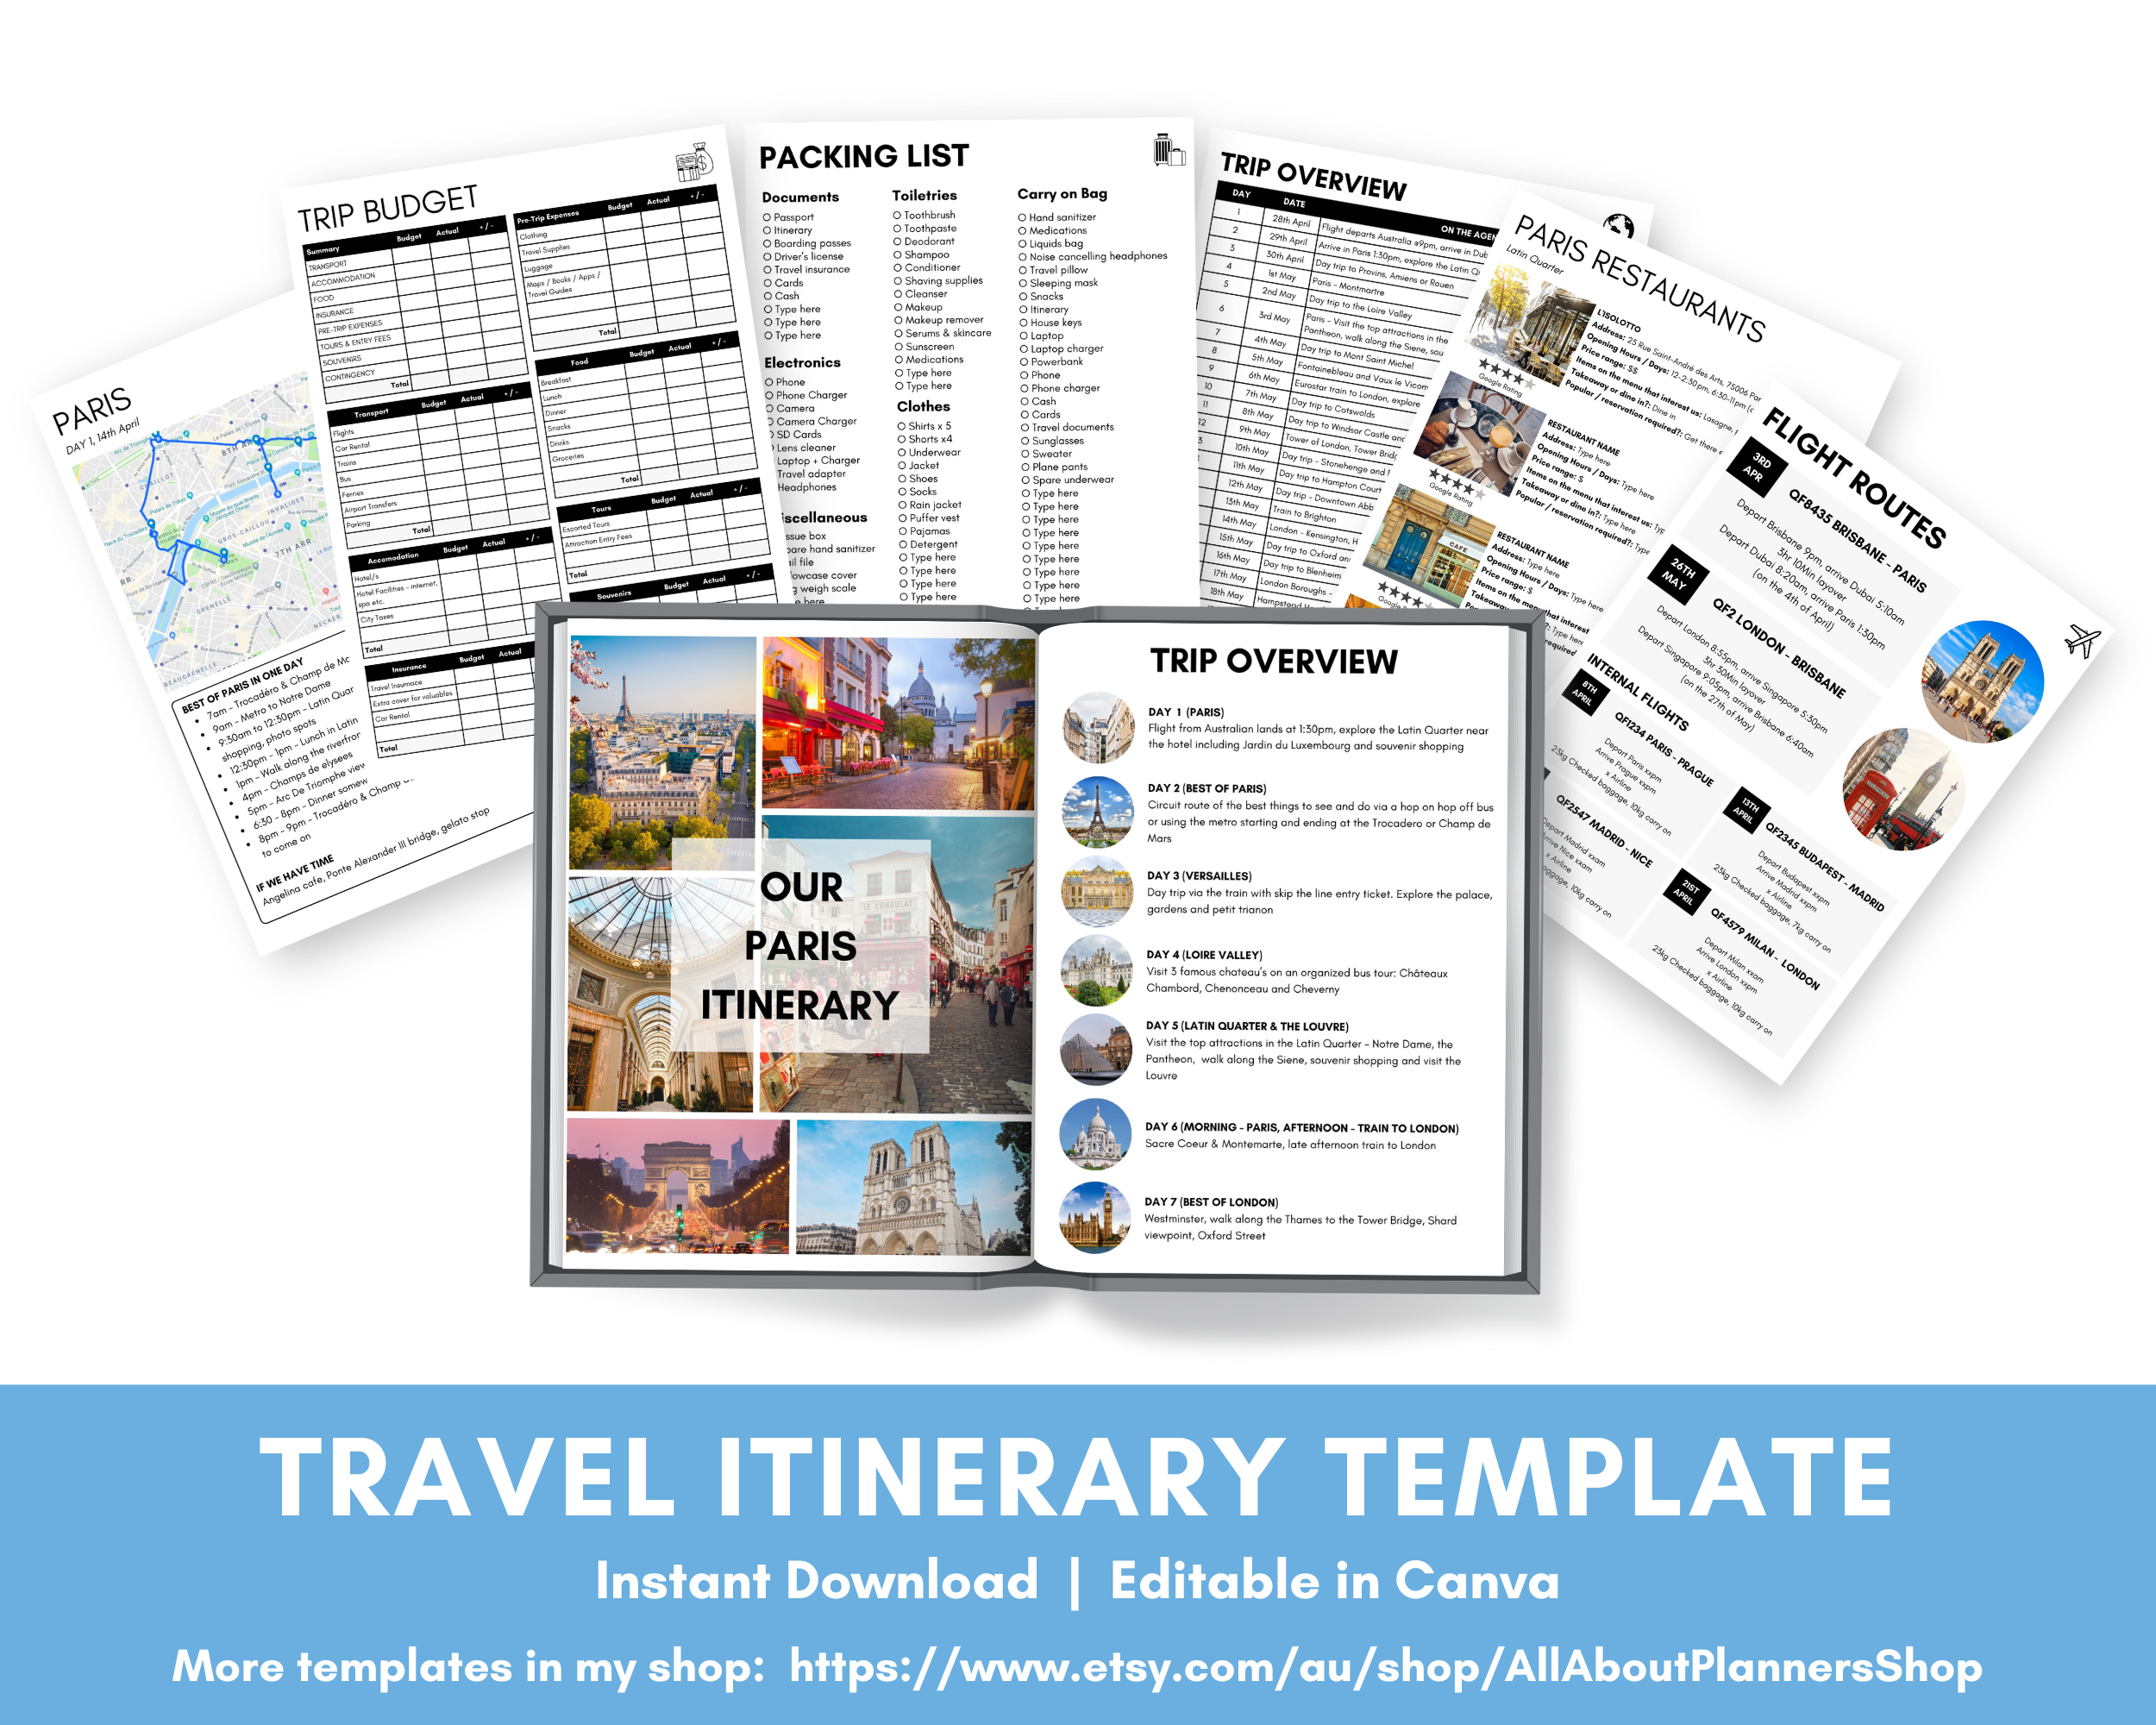 DIY itinerary template canva vacation planner travel itinerary document fully editable customisable accommodation bookings tours daily itinerary flight train restaurant list